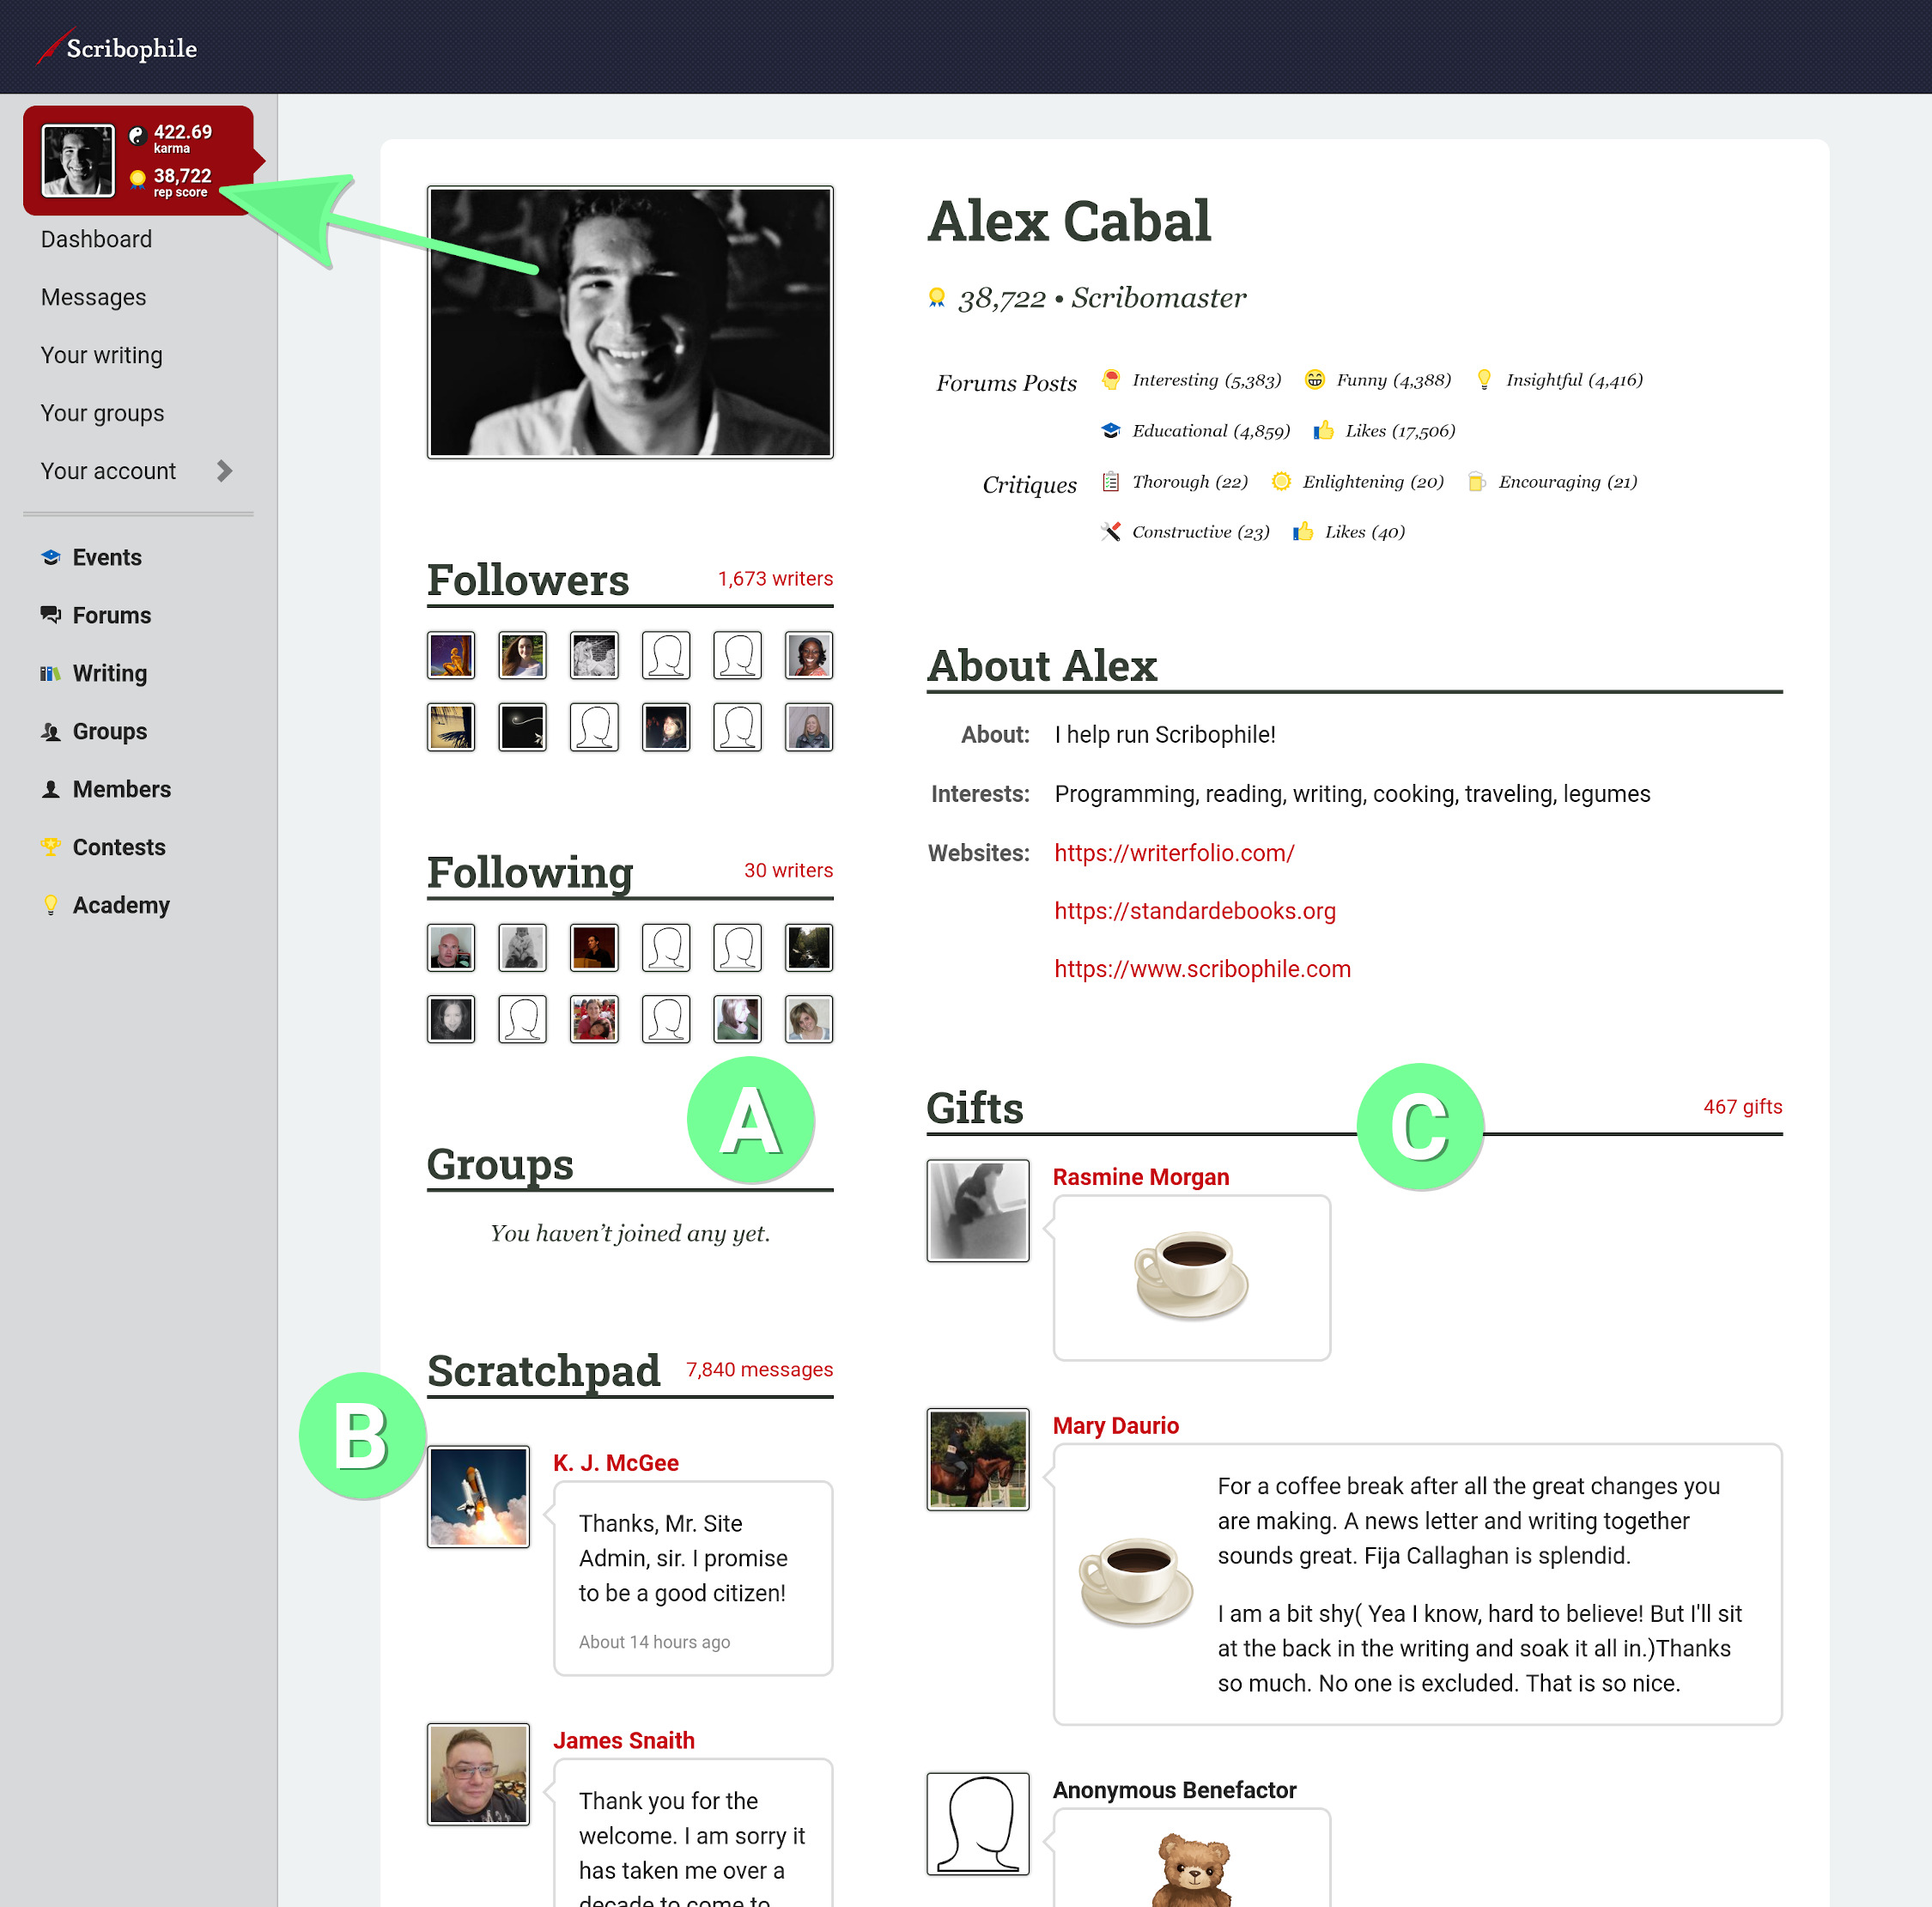 A member’s profile page